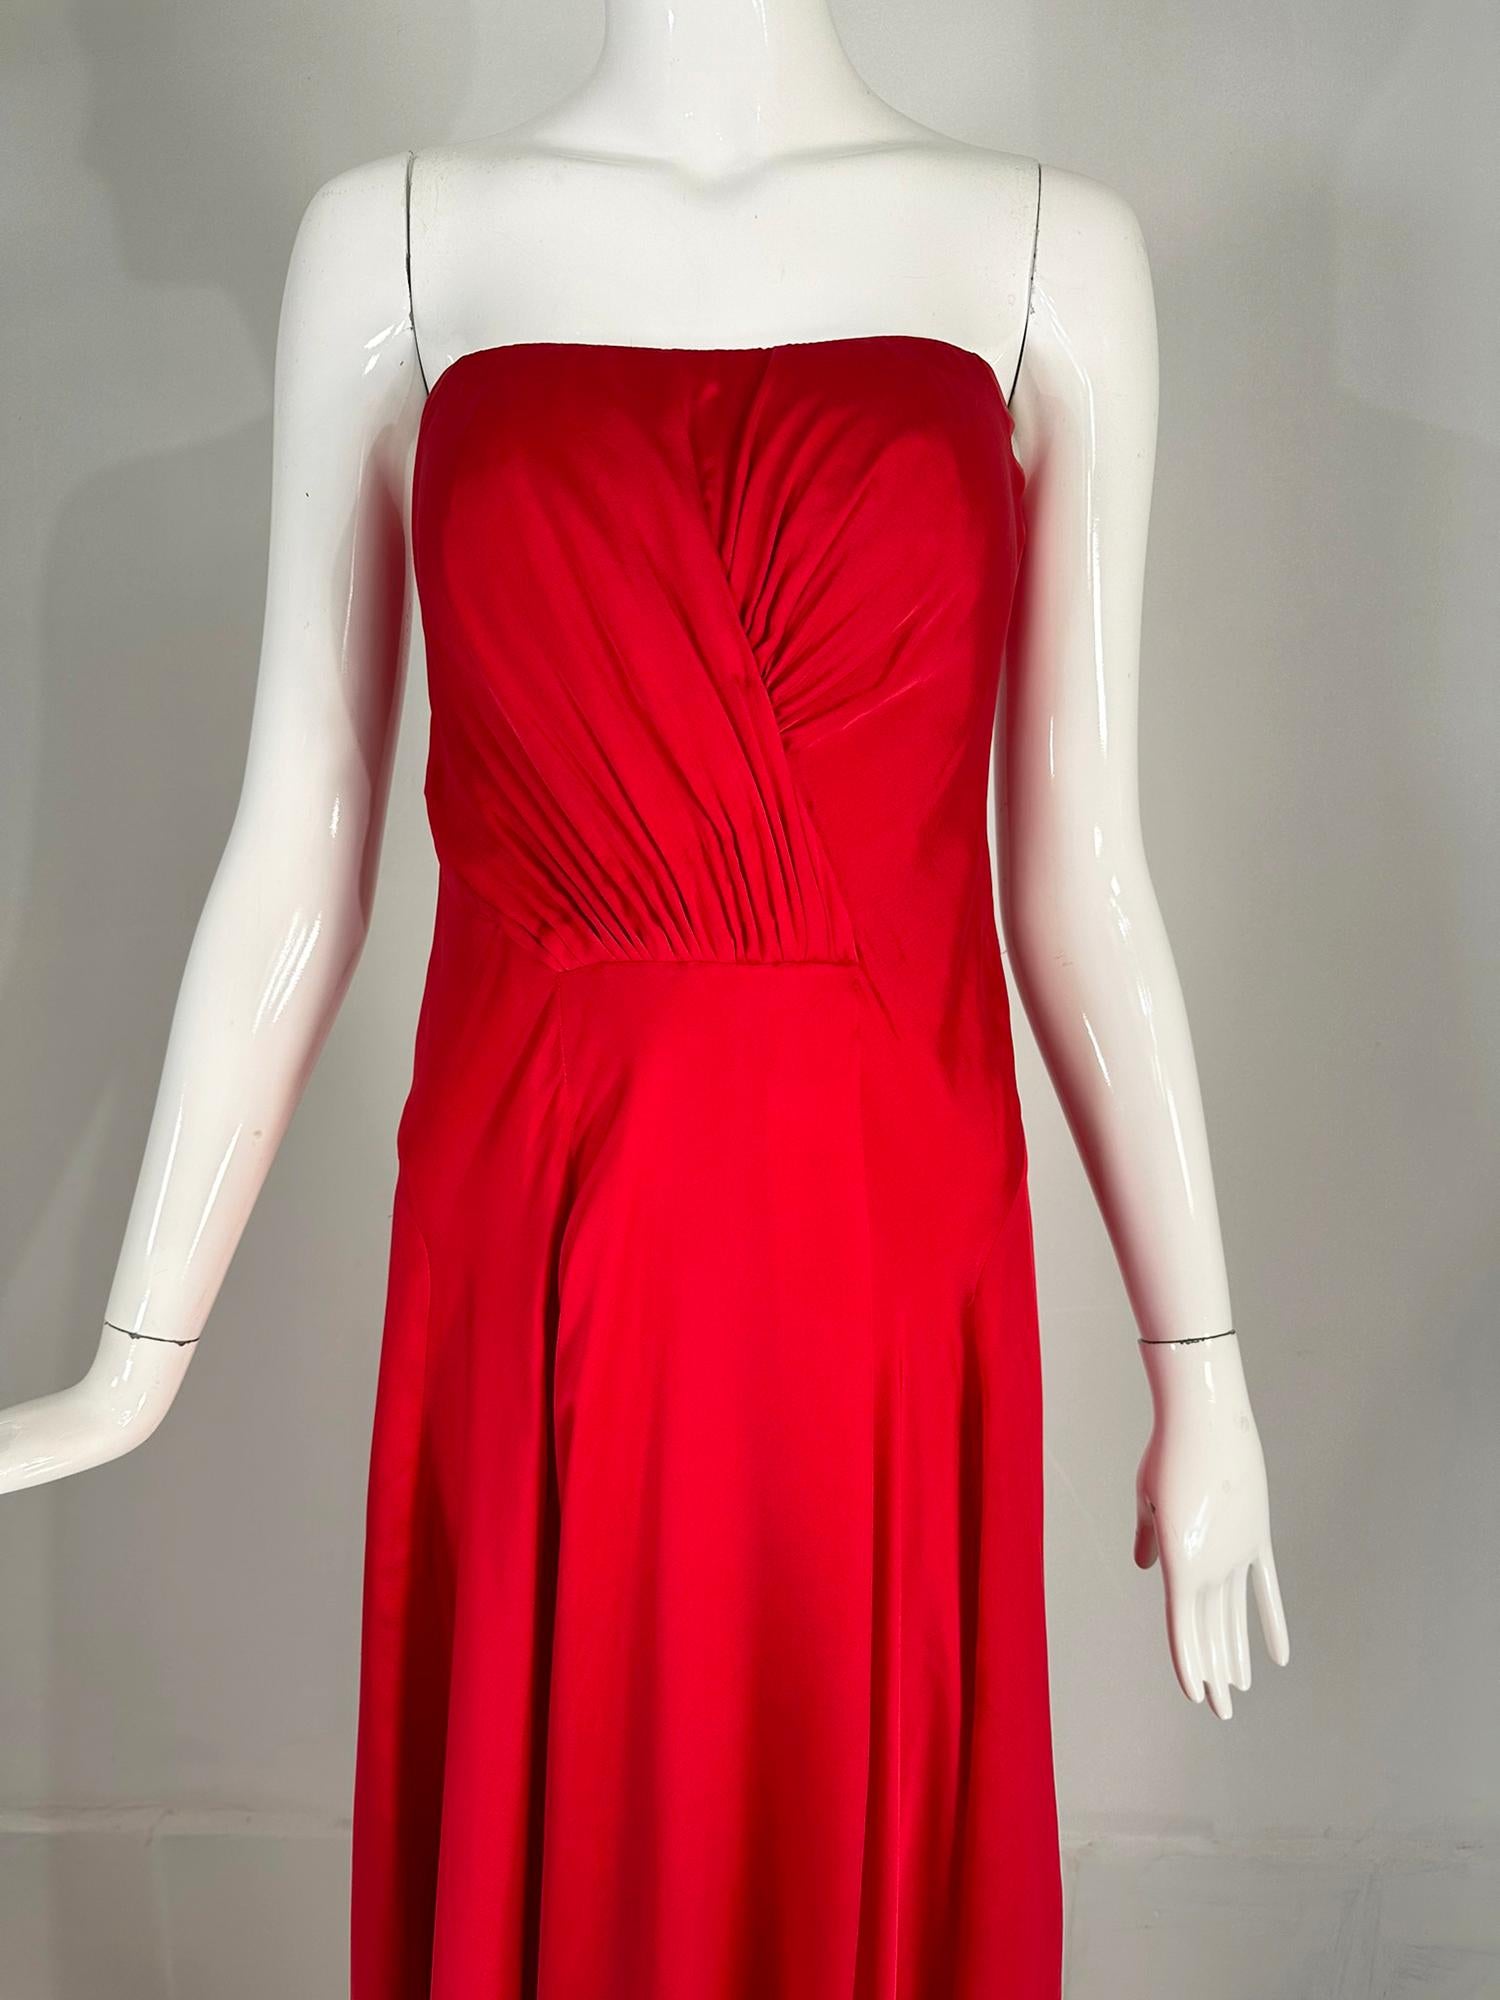 Ralph Lauren Collection draped bodice strapless evening gown with a short train. 
A beautiful fire engine red silk gown, the bodice is vertically draped to the waist, the skirt is gathered at the side waist front & falls open to the floor. The skirt